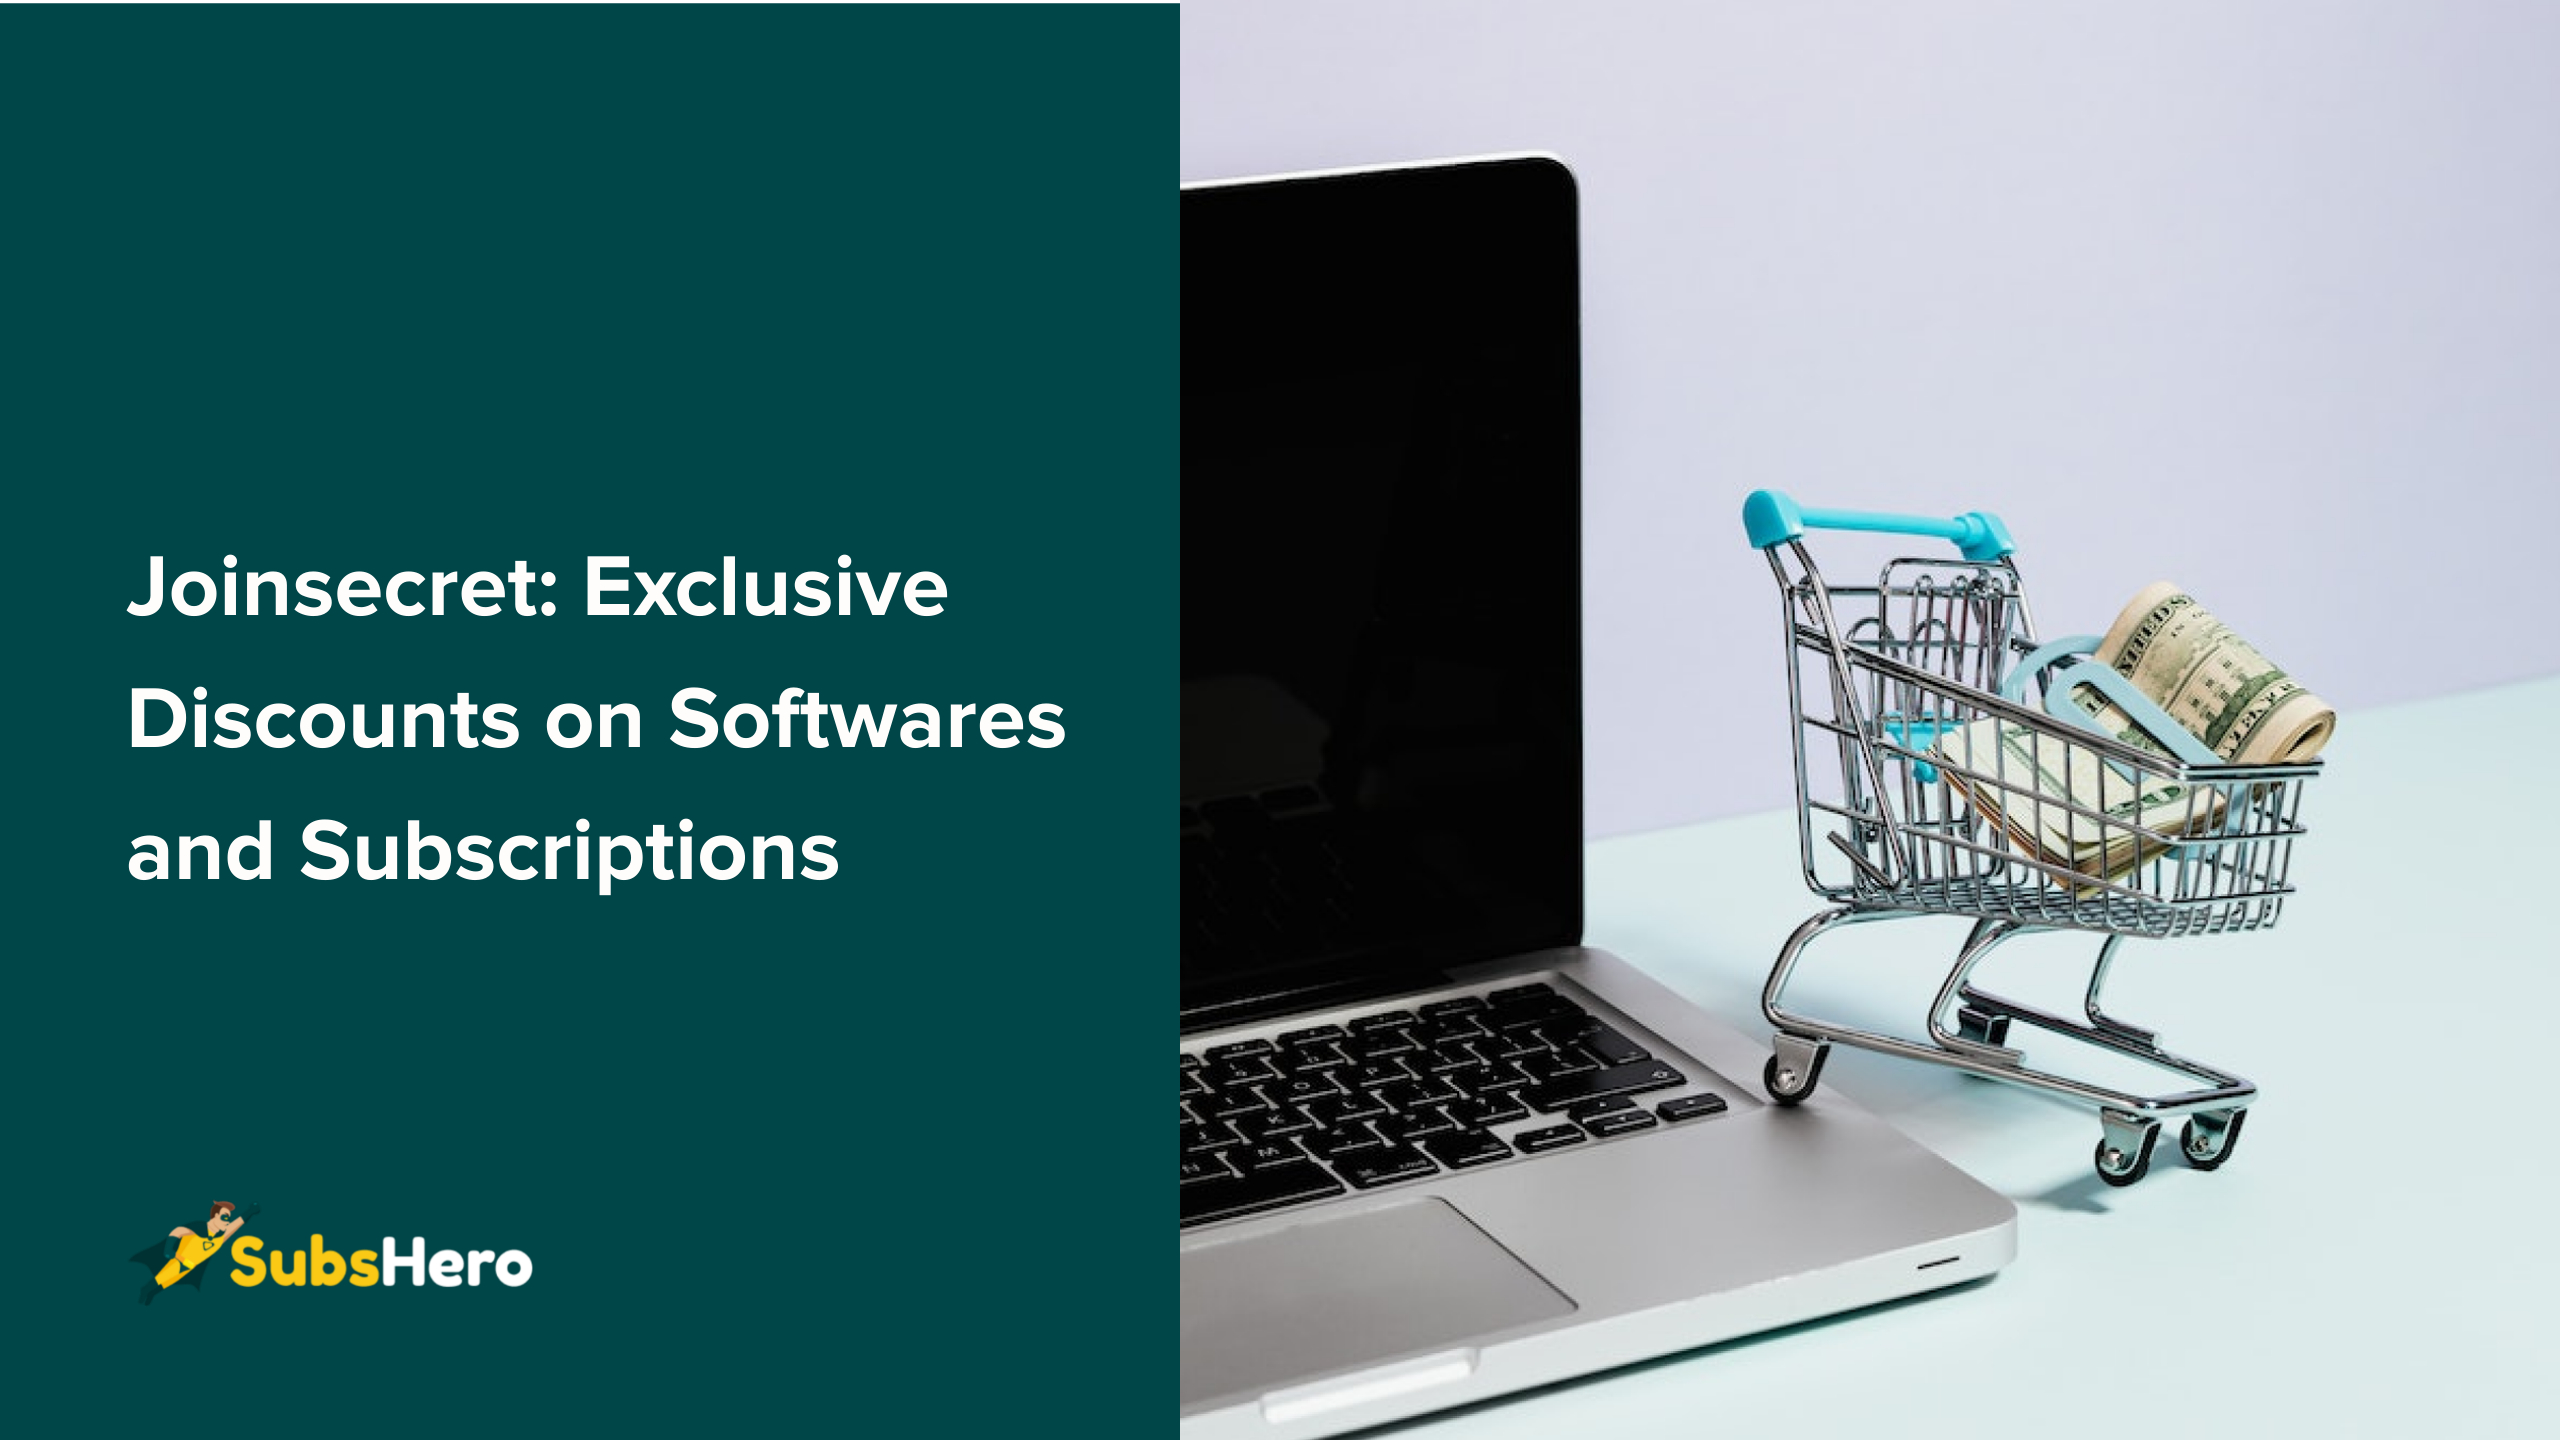 joinsecret: exclusive discounts on softwares and subscriptions